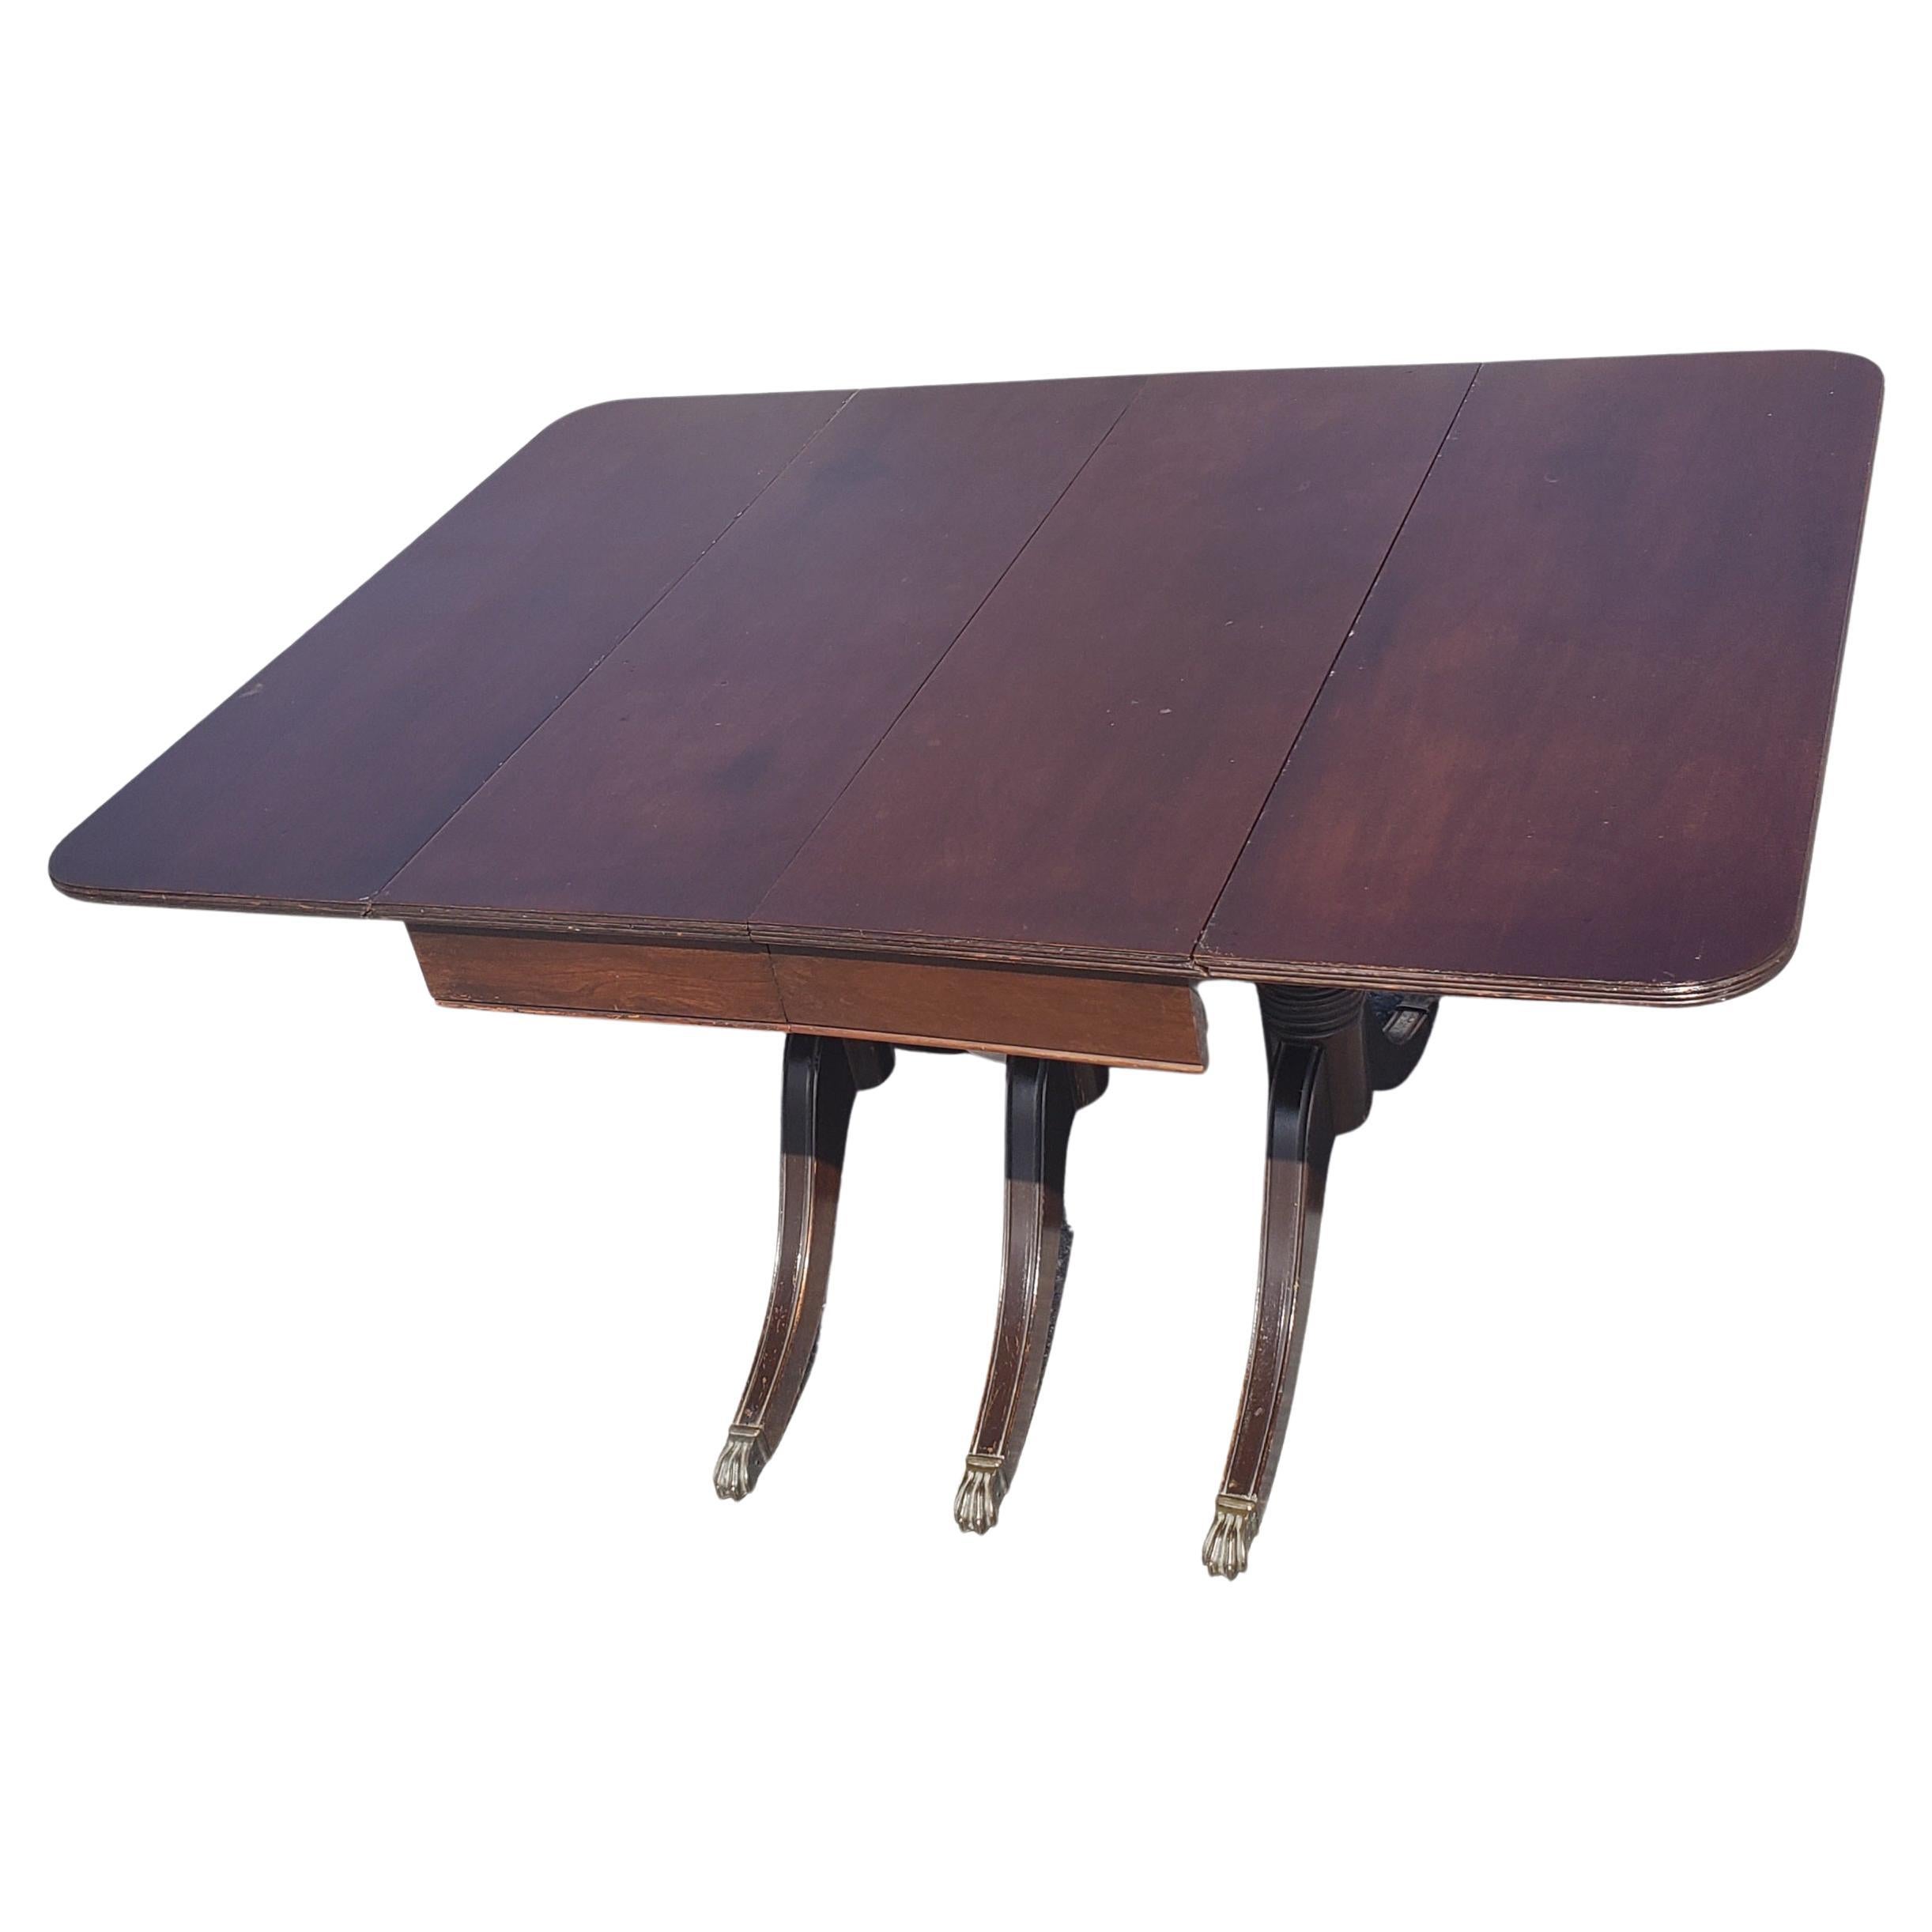 American Vintage Federal Style Triple Pedestal Drop-Leaf Dining Table, circa 1940s For Sale